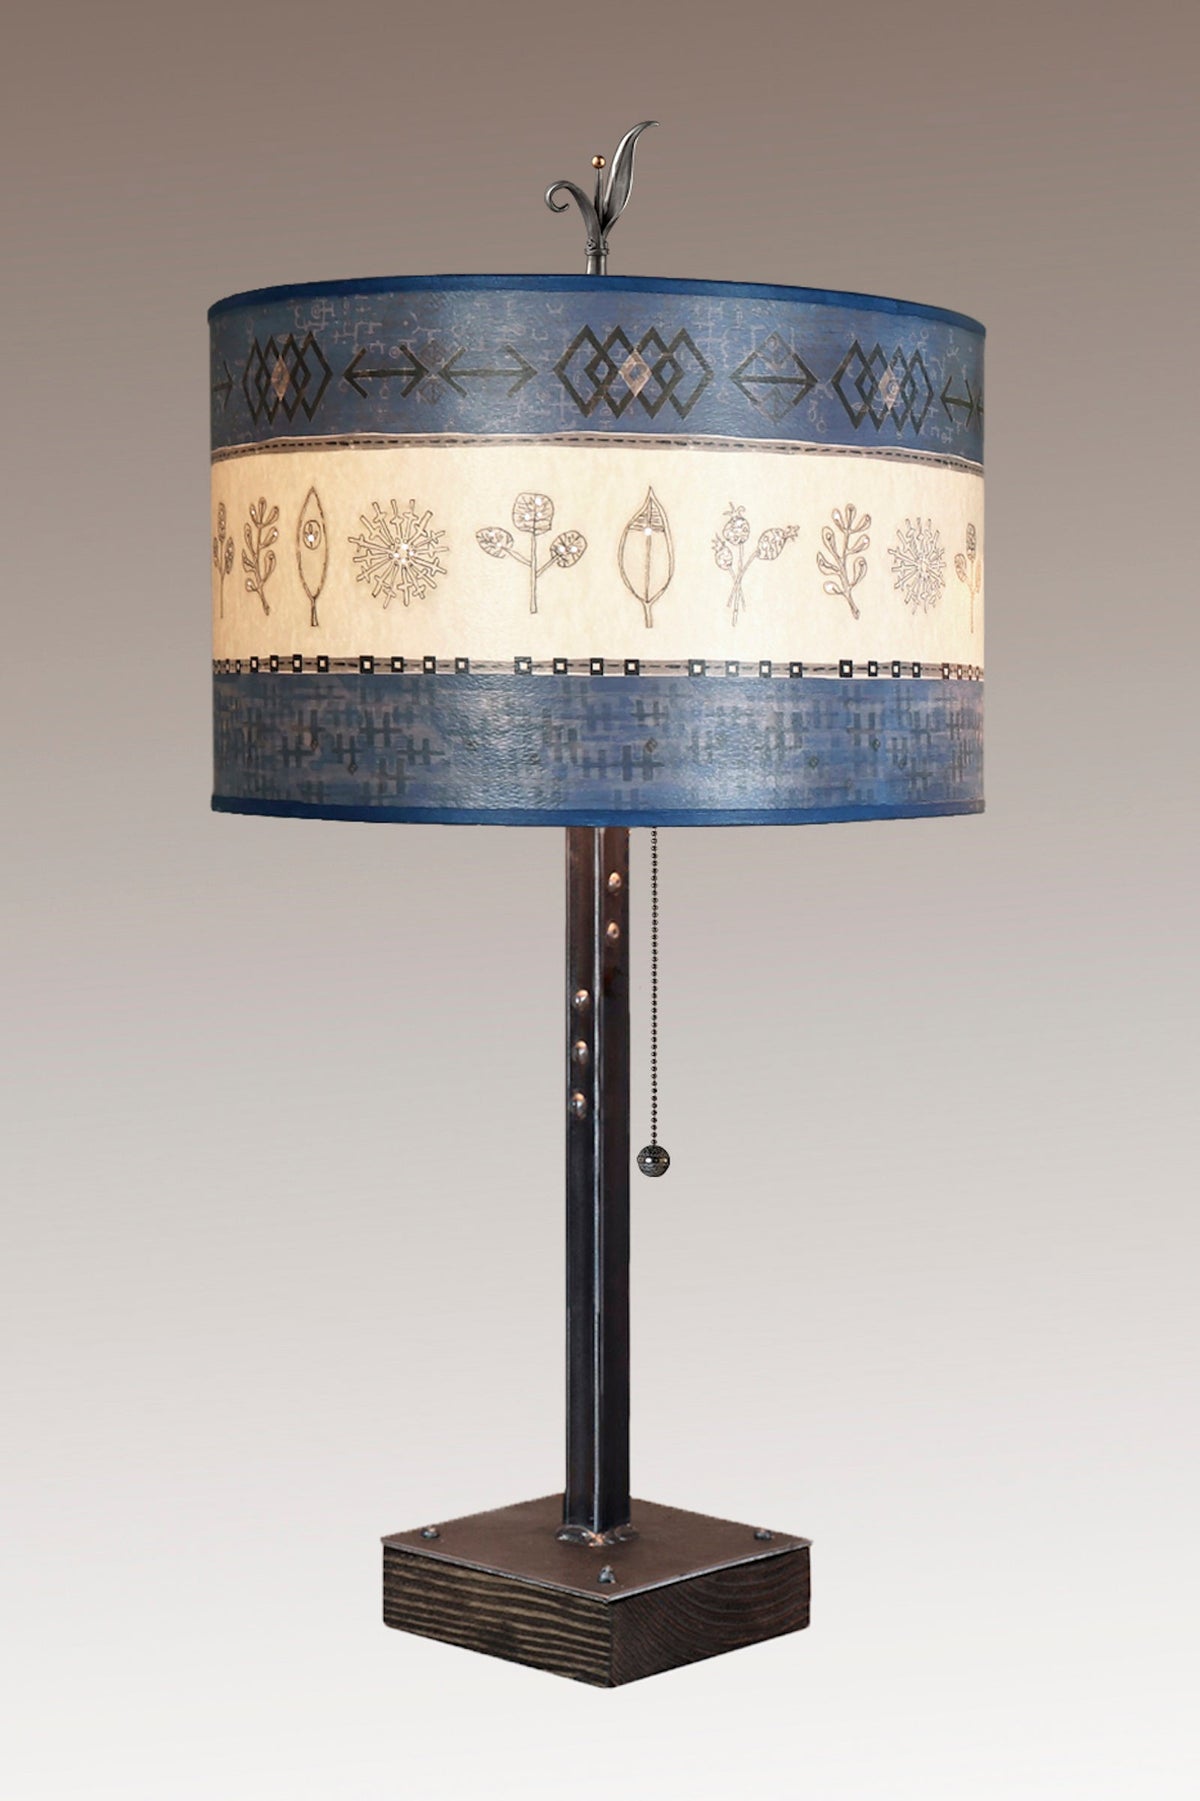 Janna Ugone &amp; Co Table Lamps Steel Table Lamp on Wood with Large Drum Shade in Woven &amp; Sprig in Sapphire